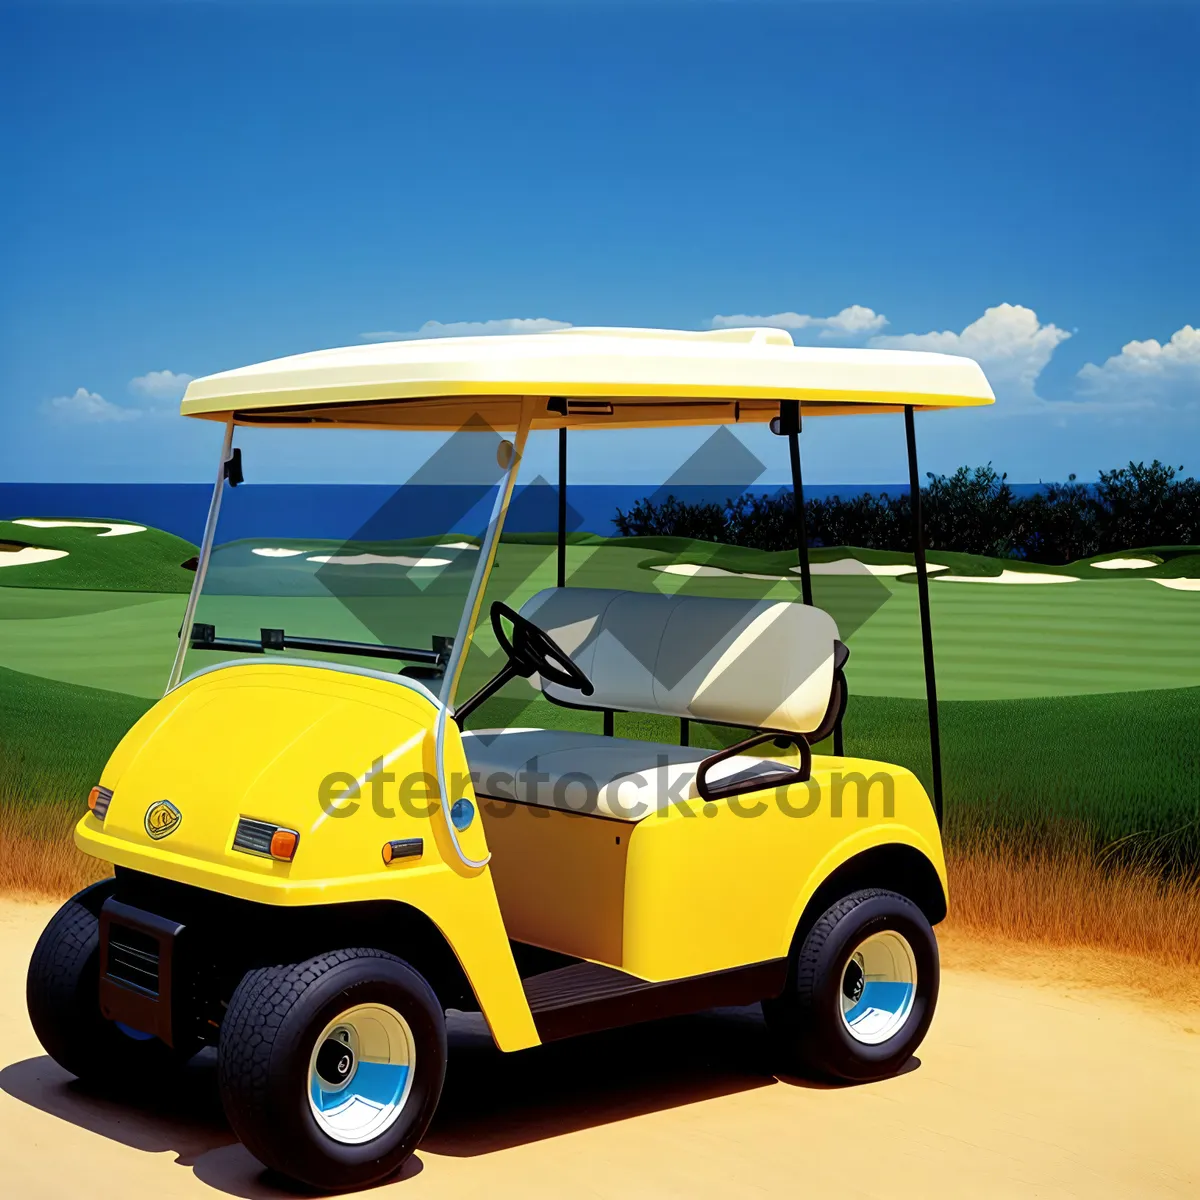 Picture of Golf Cart on a Speedy Drive